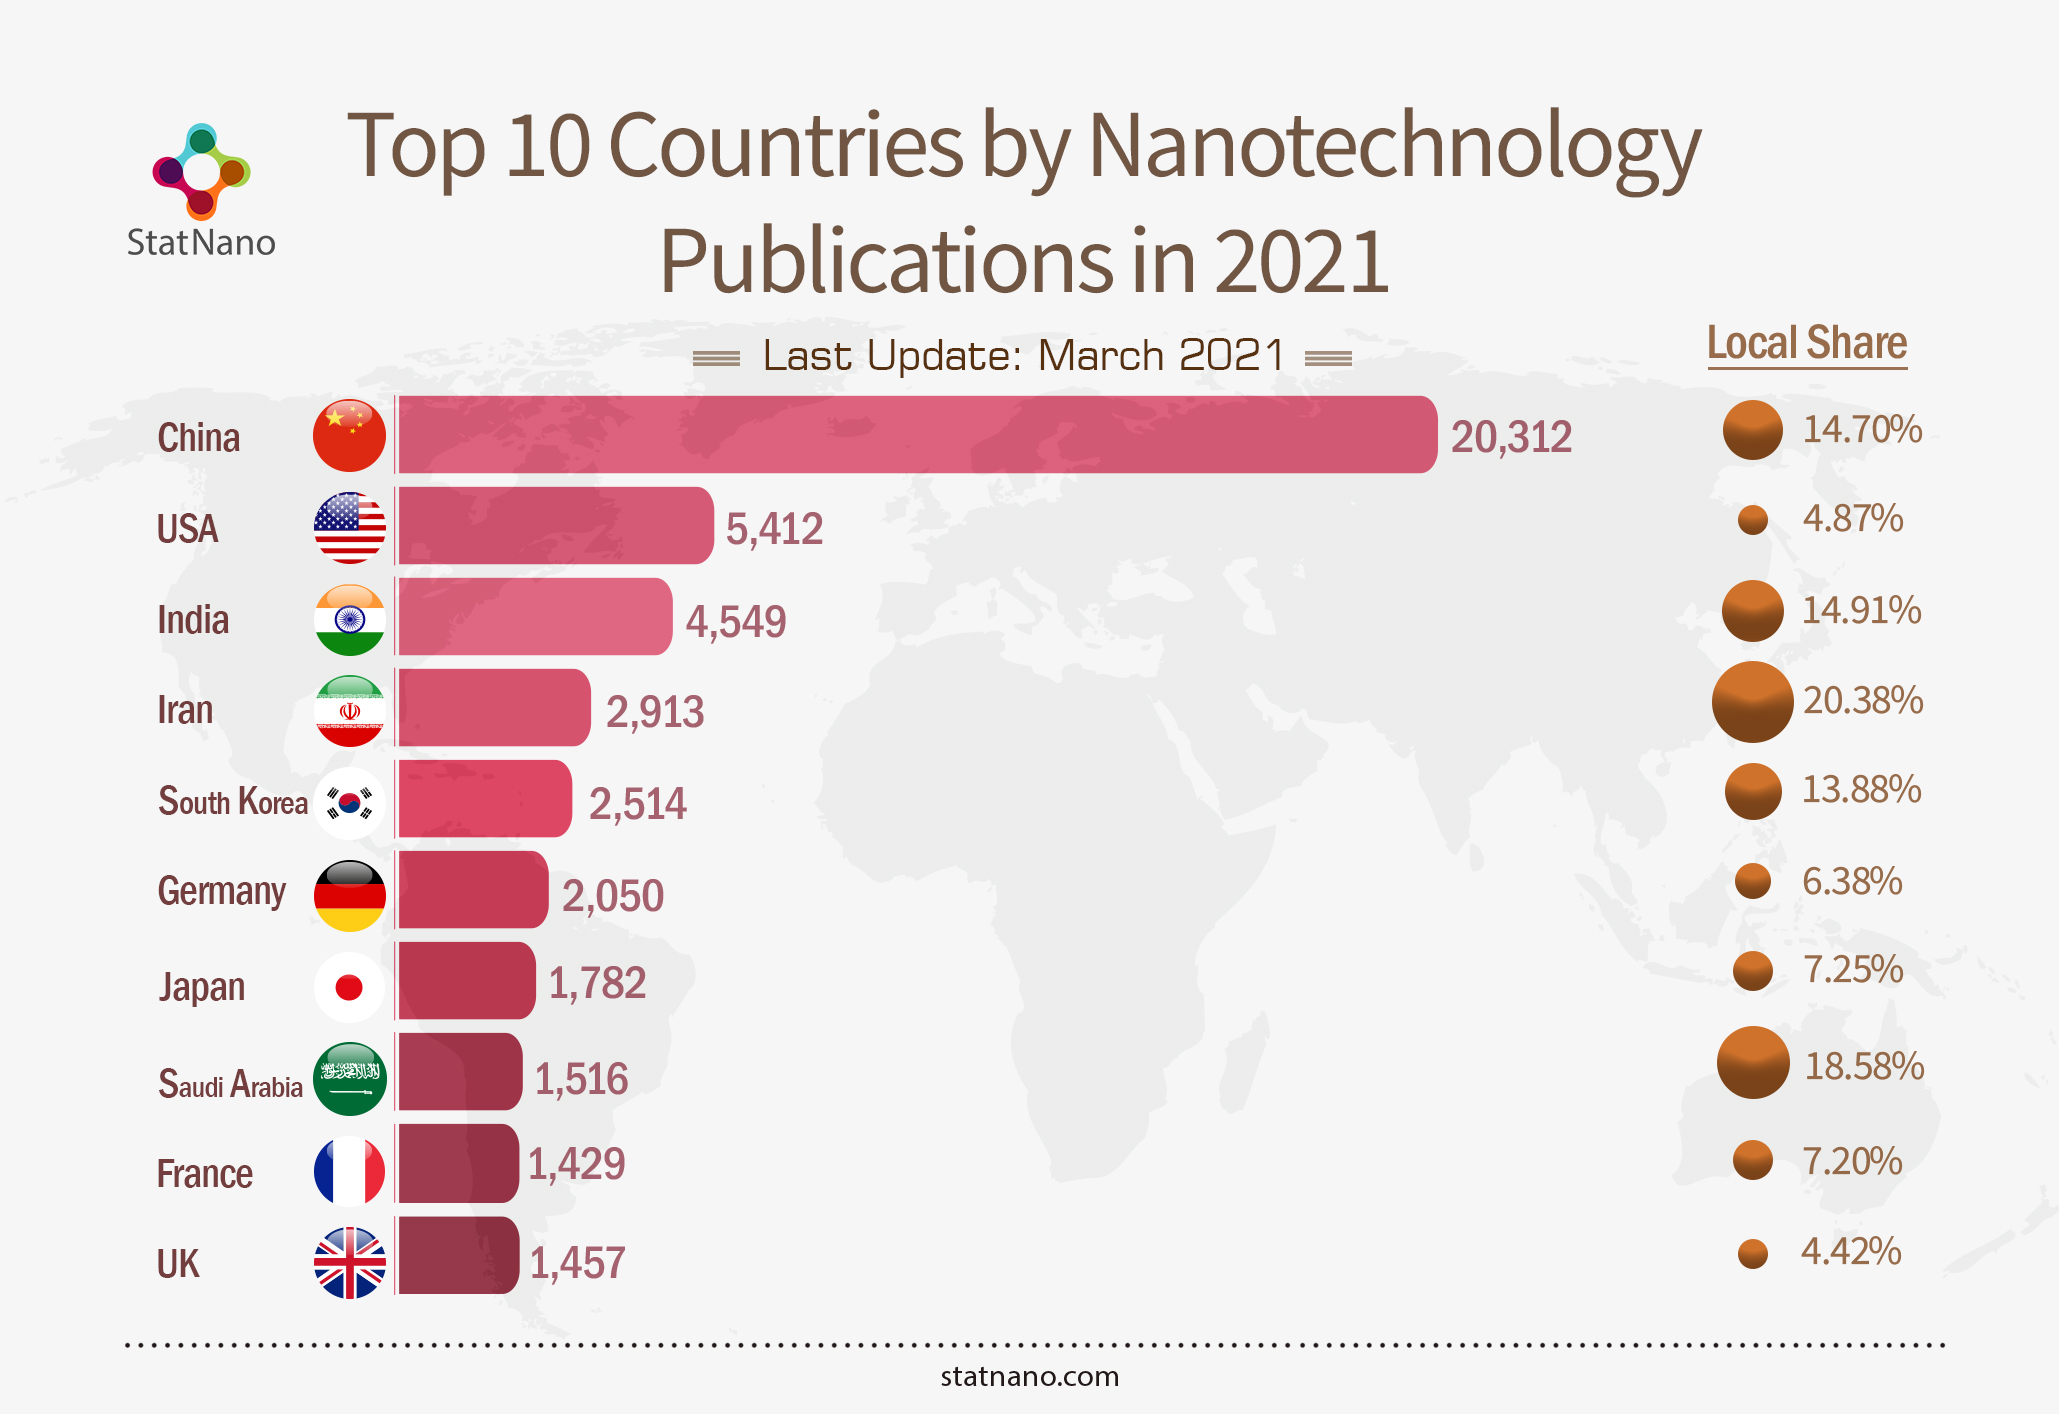 Top 10 Countries by Nanotechnology Publications in the First Quarter of